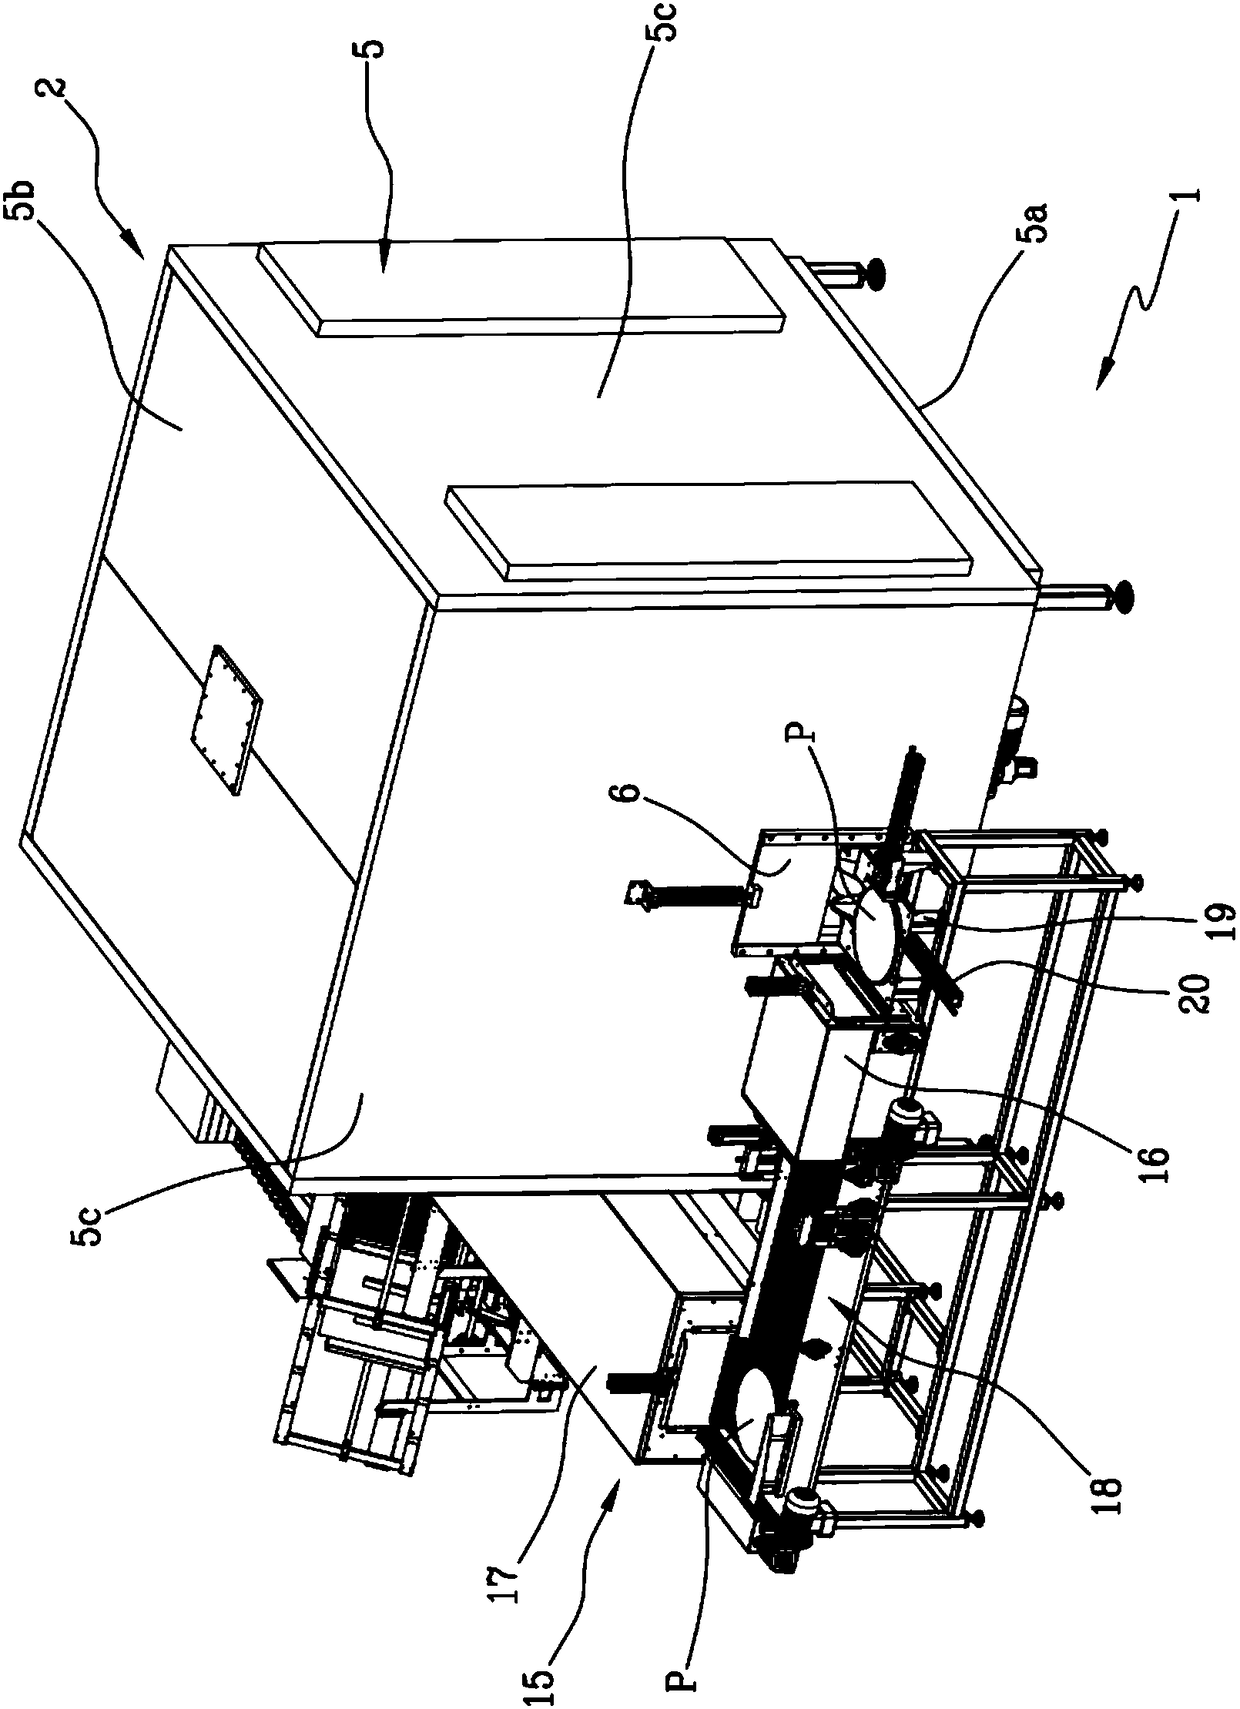 Apparatus for the preparation and dispensing of bakery food products